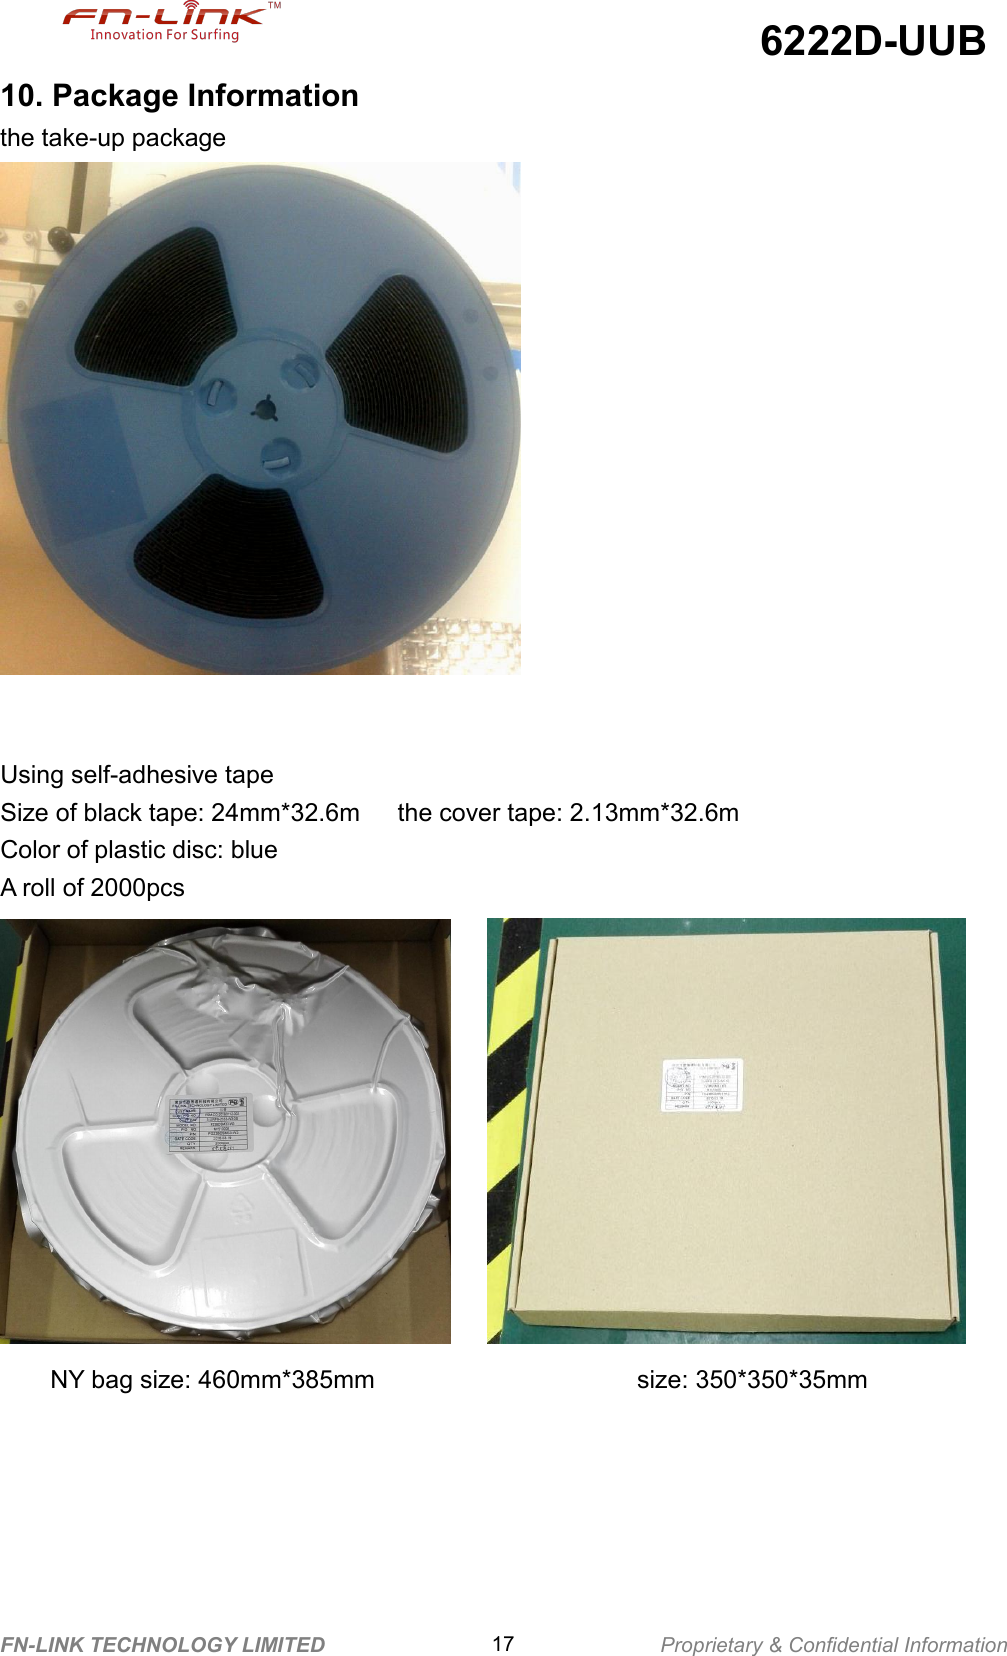 6222D-UUBFN-LINK TECHNOLOGY LIMITED 17 Proprietary &amp; Confidential Information10. Package Informationthe take-up packageUsing self-adhesive tapeSize of black tape: 24mm*32.6m the cover tape: 2.13mm*32.6mColor of plastic disc: blueA roll of 2000pcsNY bag size: 460mm*385mm size: 350*350*35mm